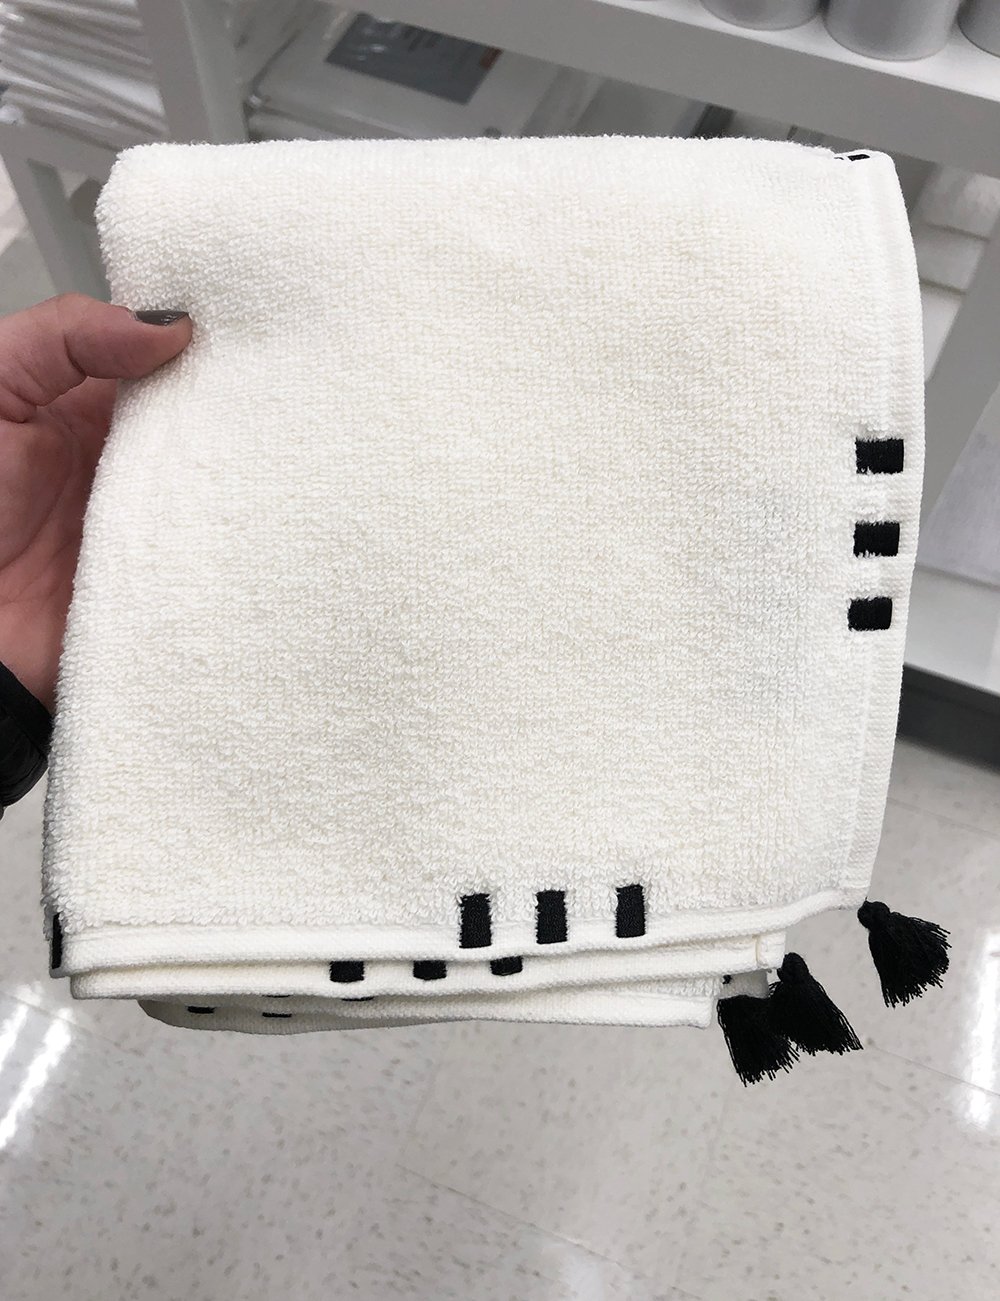 10 Home Decor Items That Impressed Me at Target - roomfortuesday.com